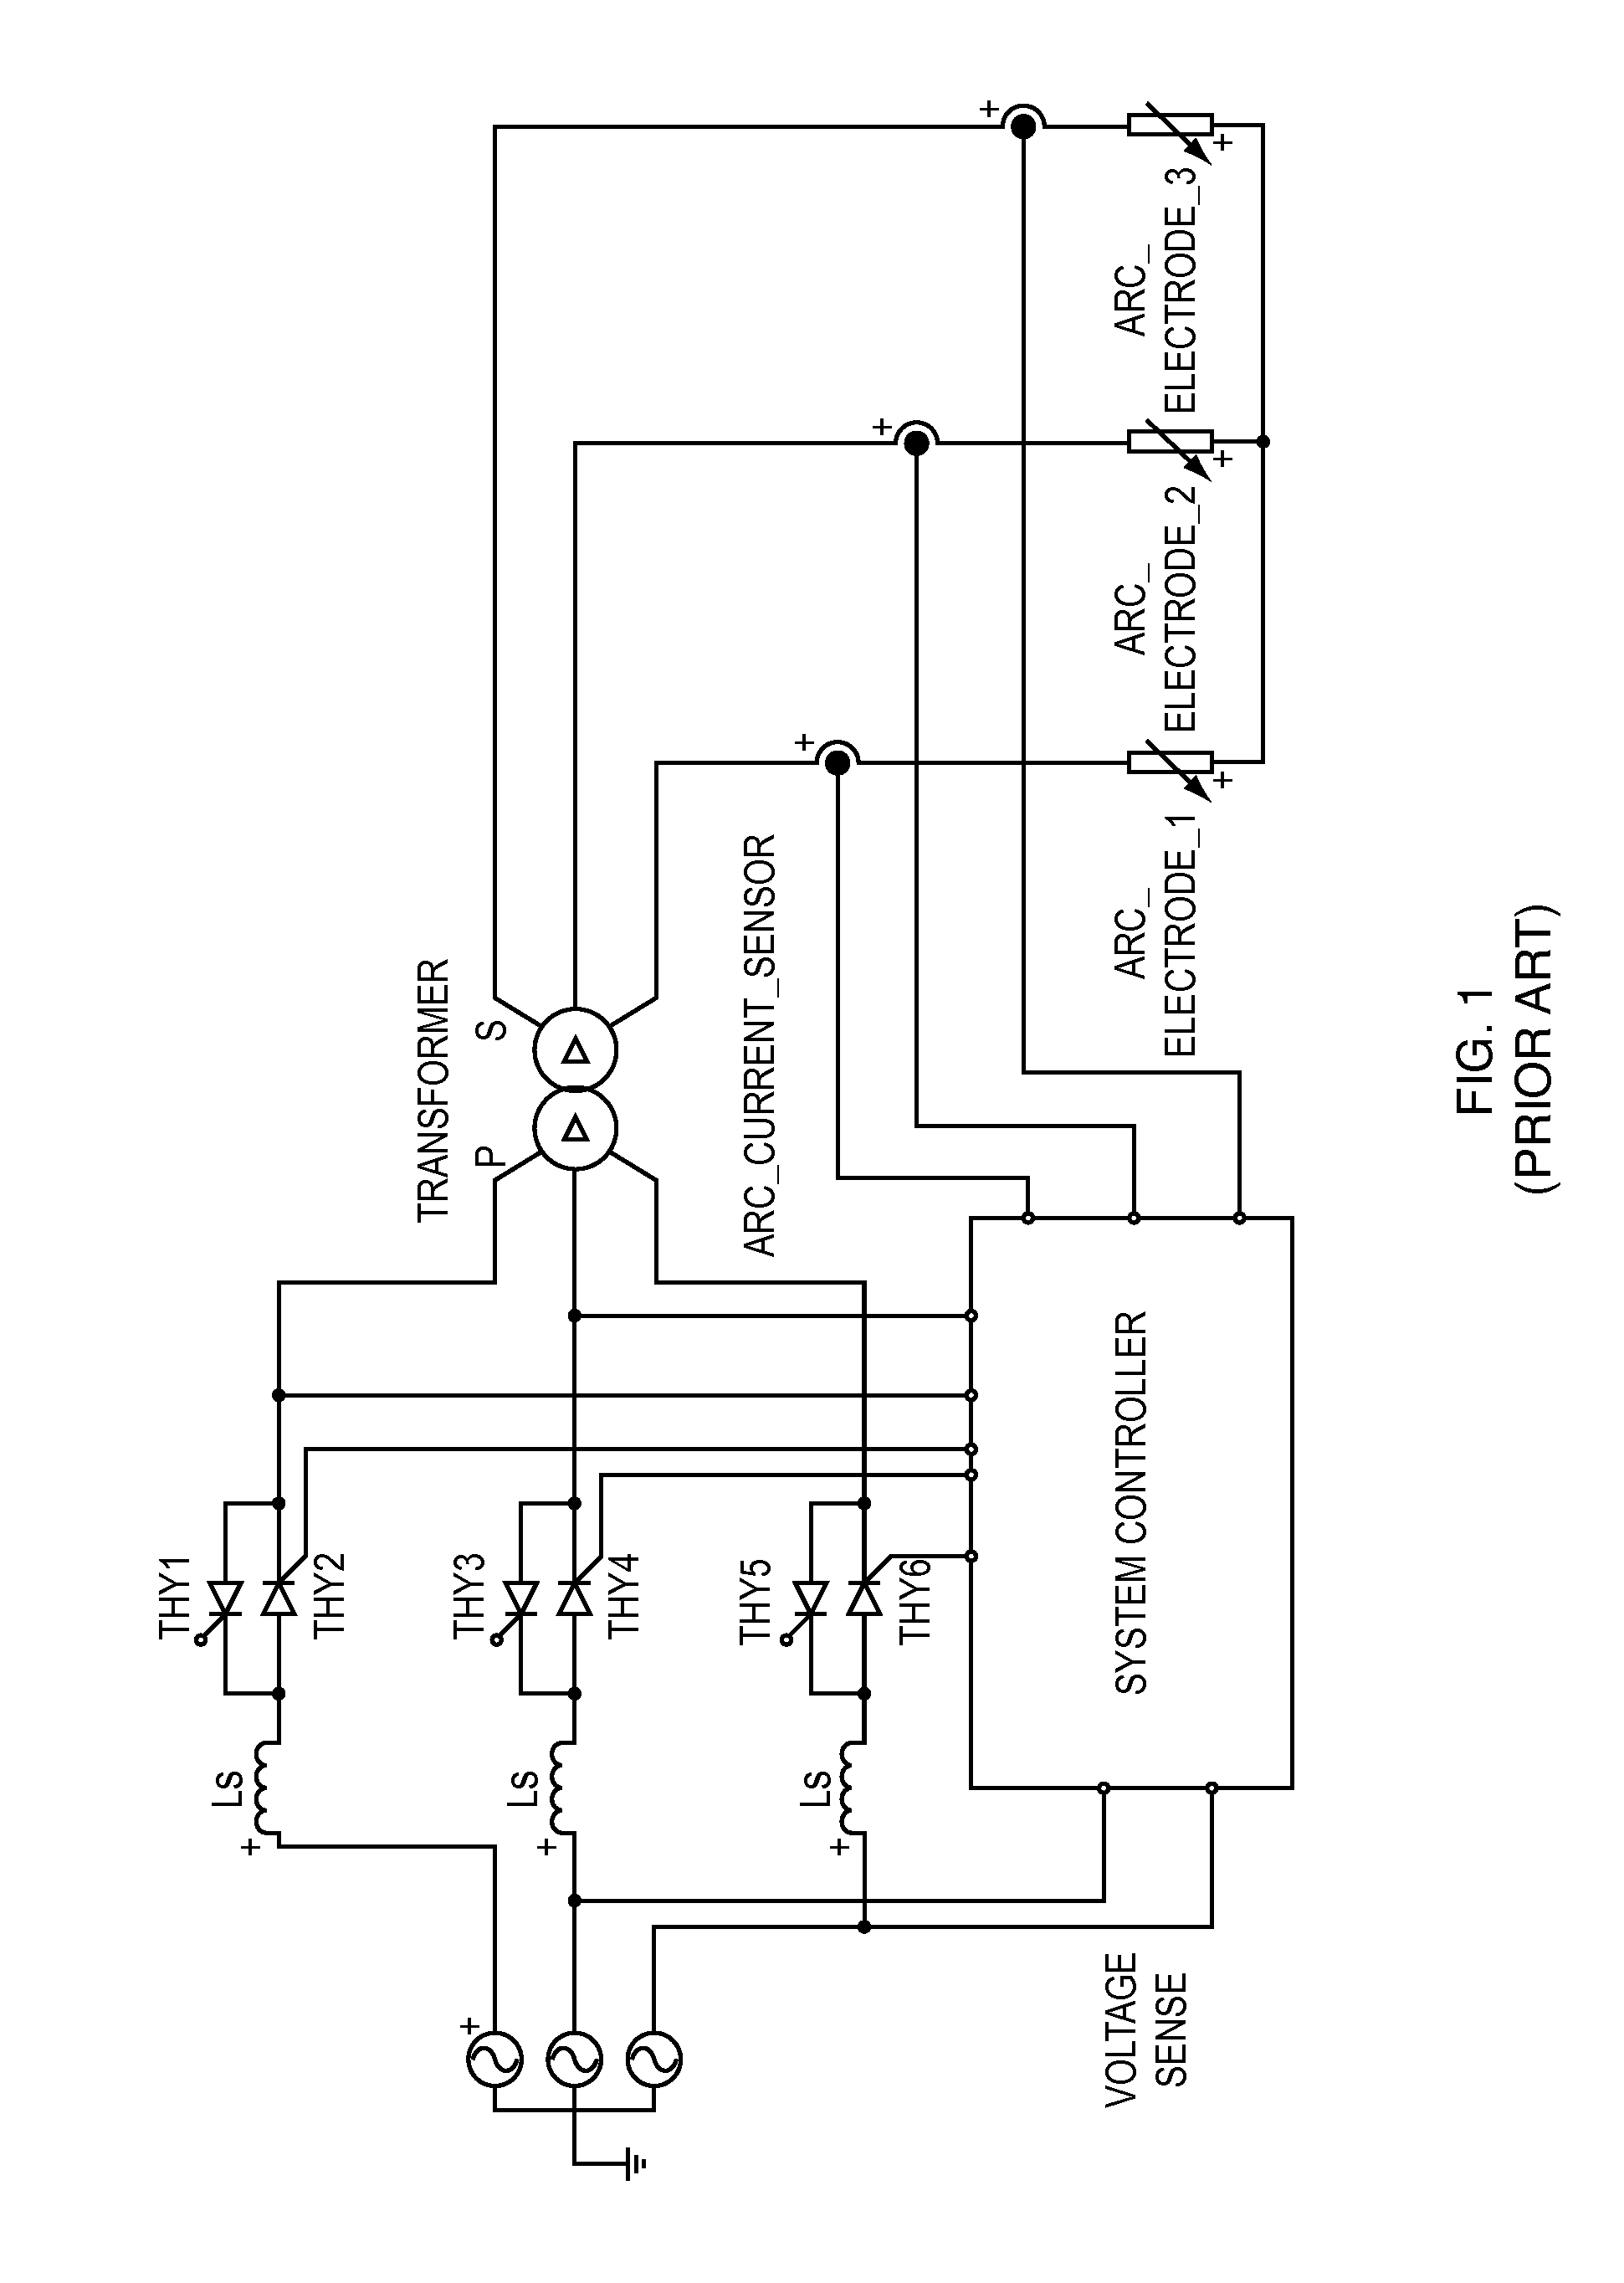 System and method to deliver and control power to an arc furnace